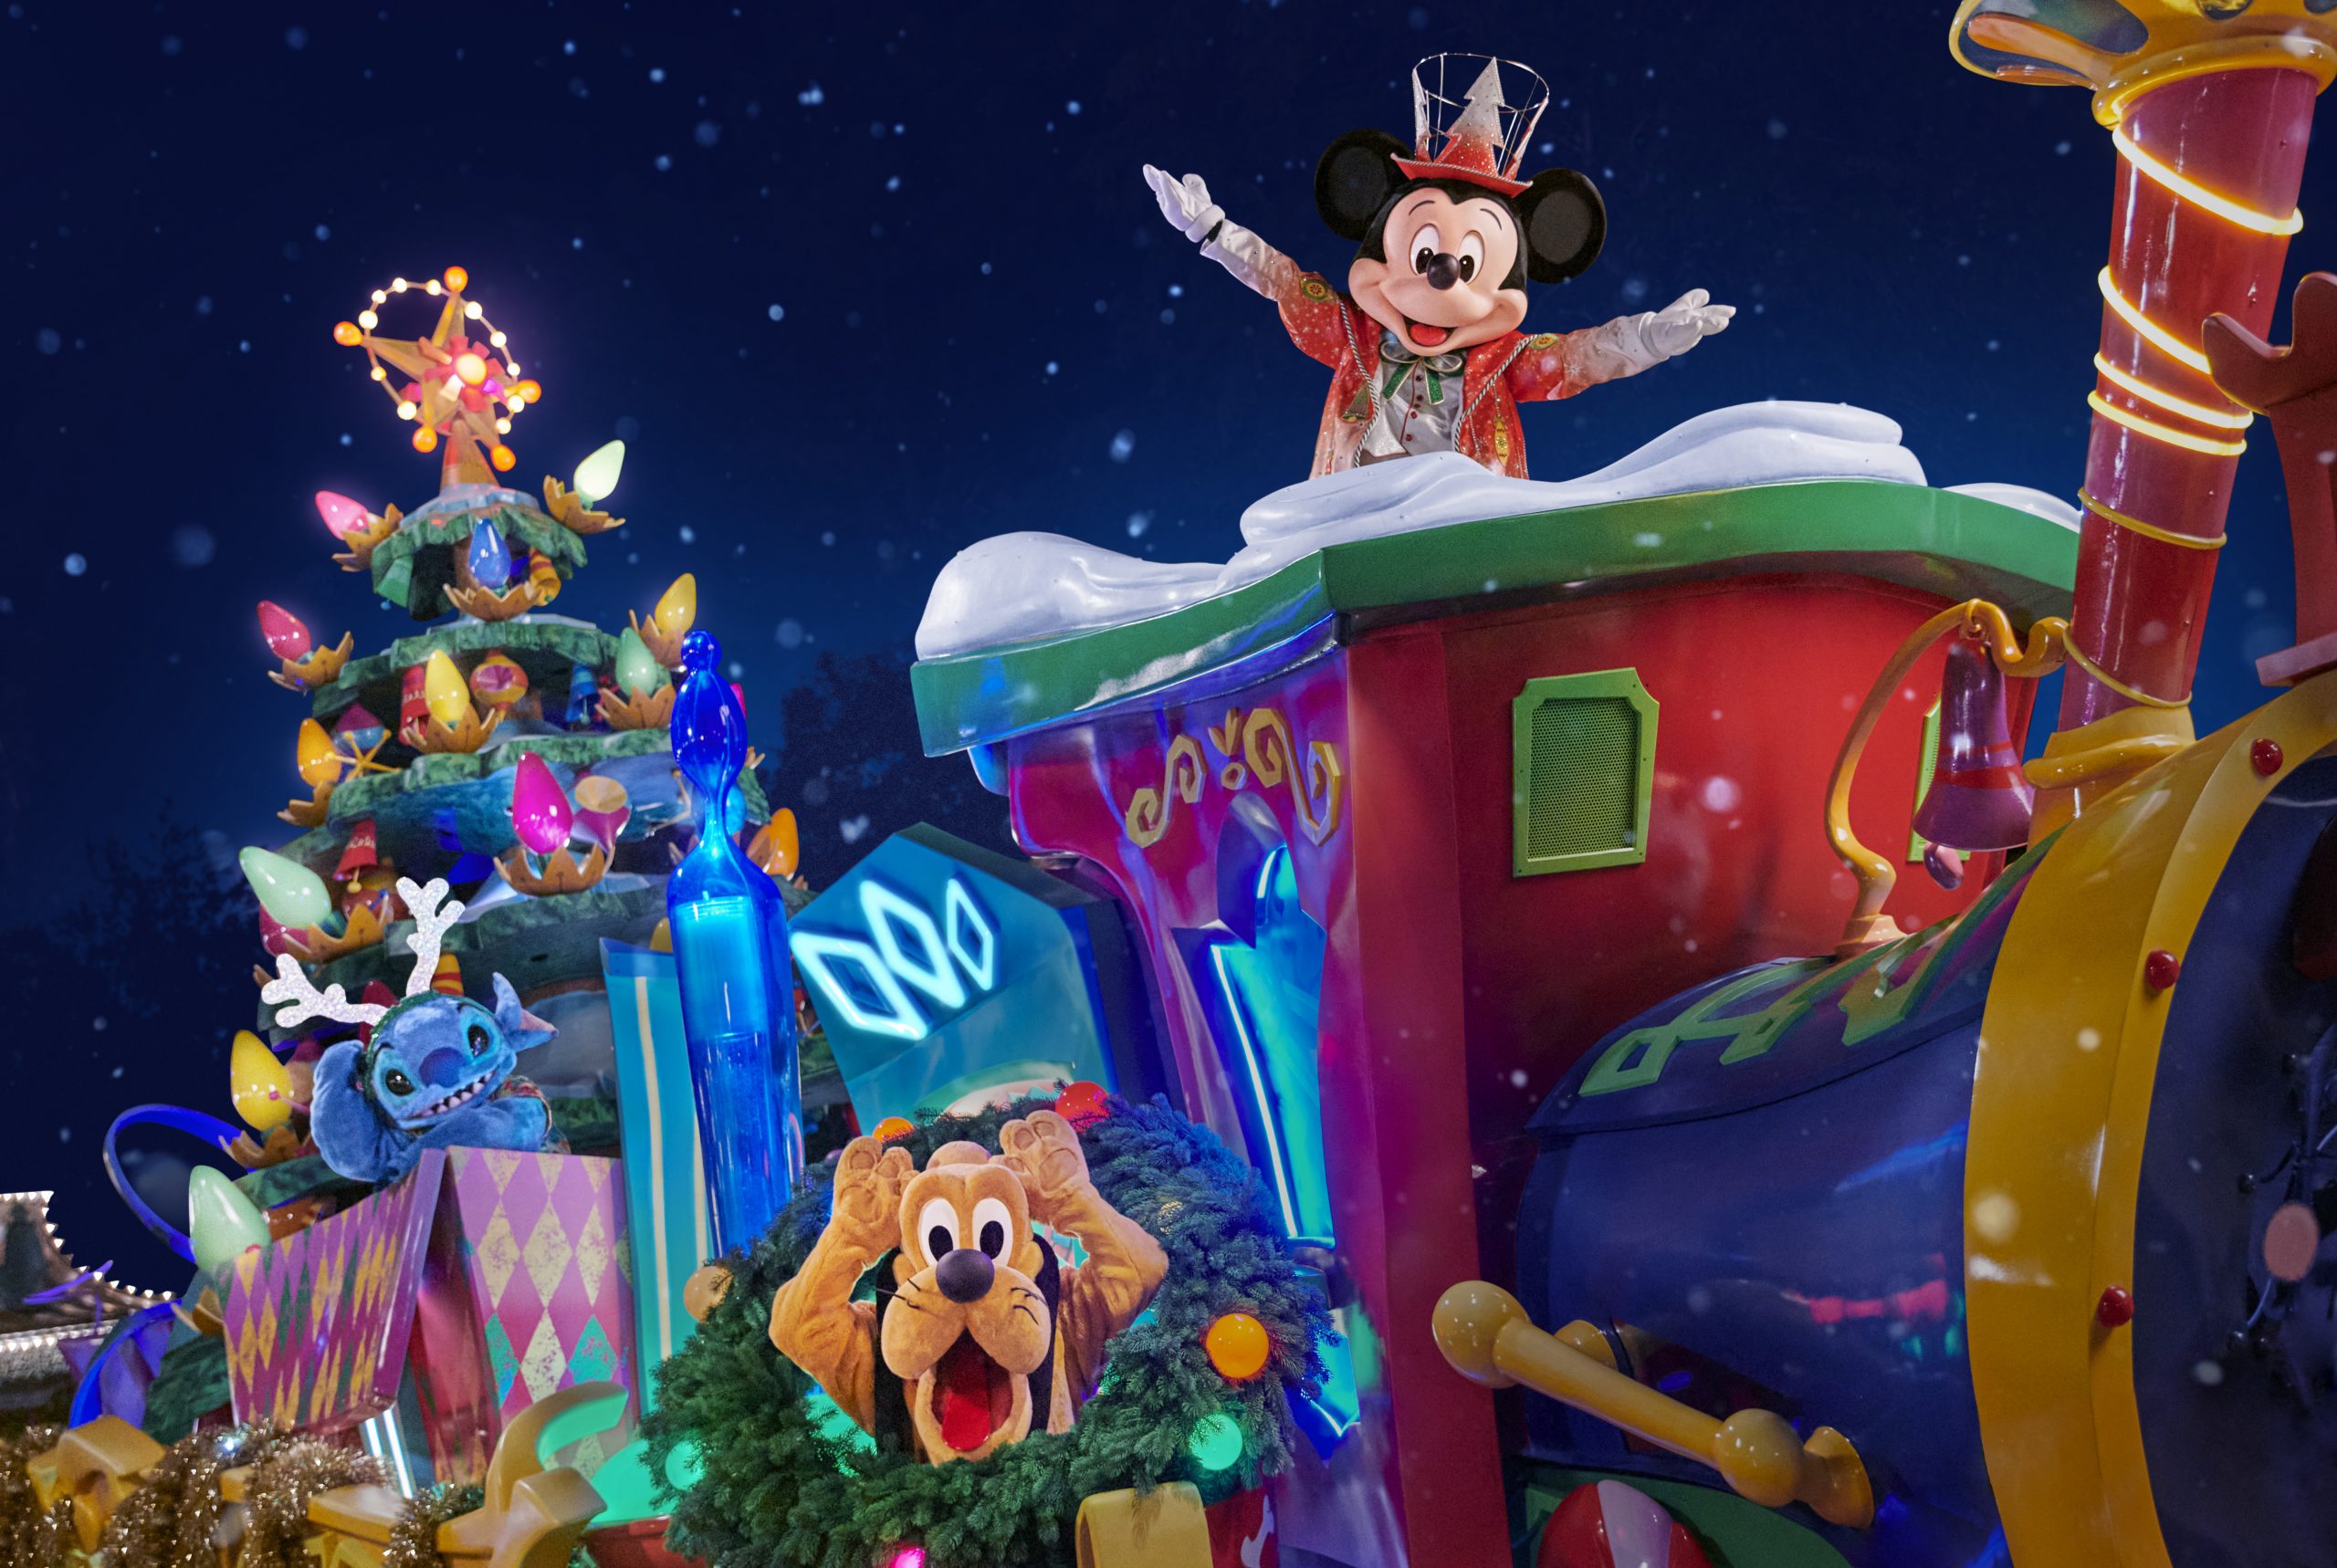 Disney Enchanted Christmas will Shine Even Brighter from November 12th